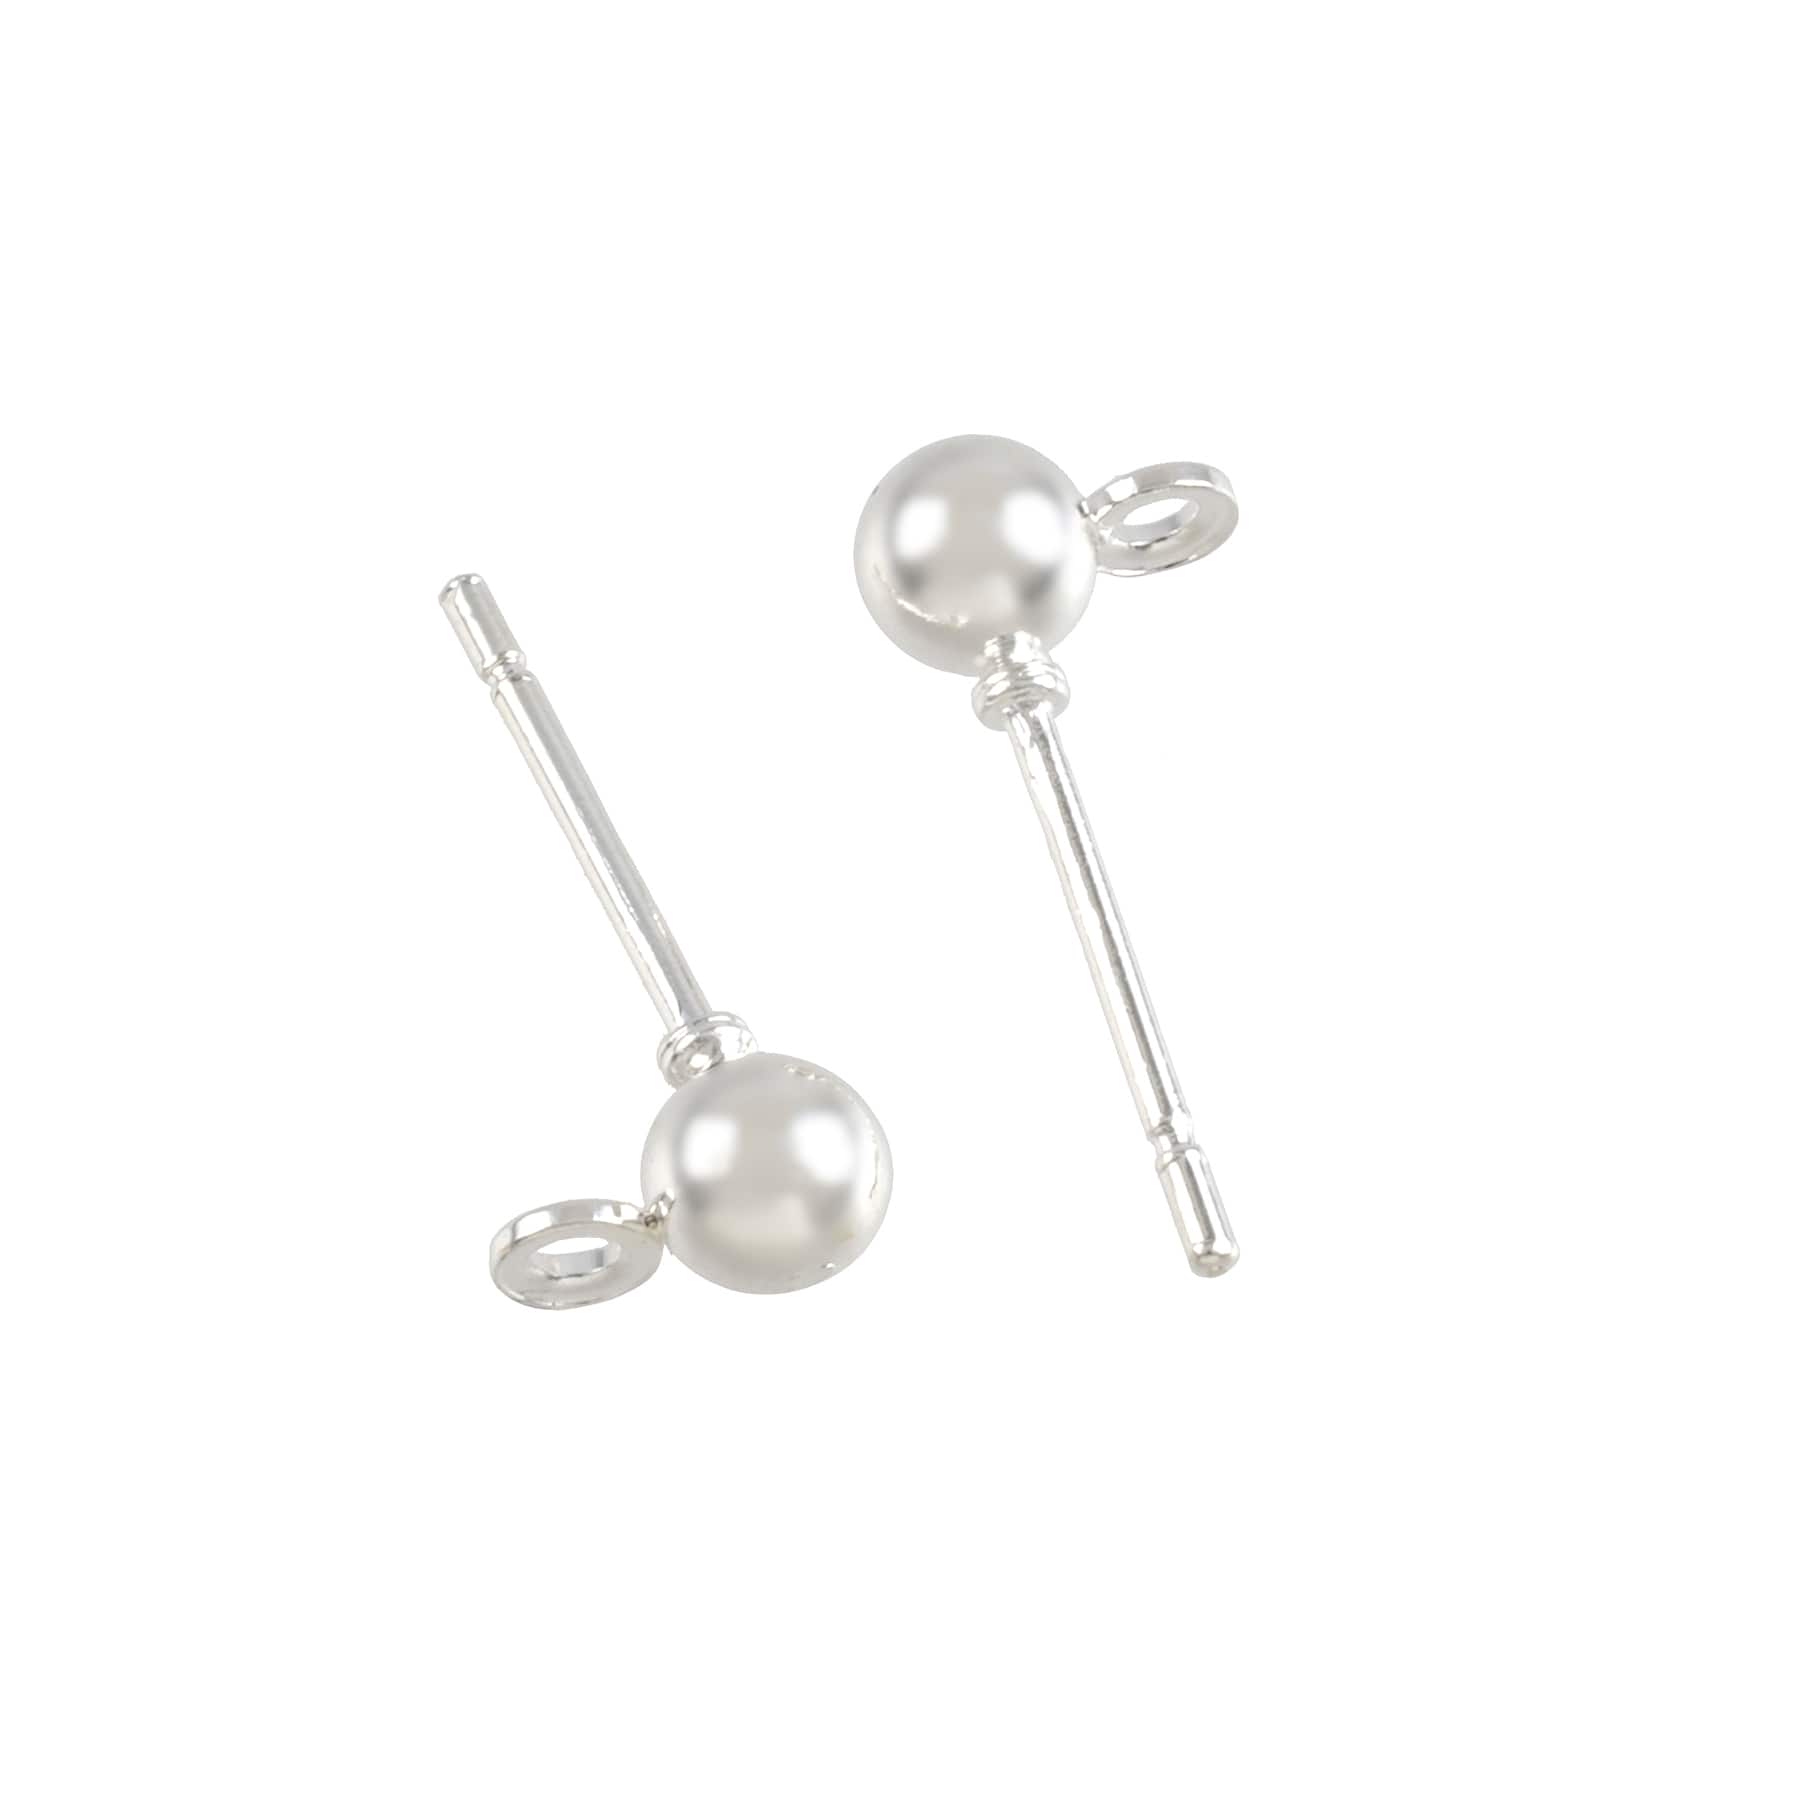 12 Pack: Earring Post Ball Top by Bead Landing™